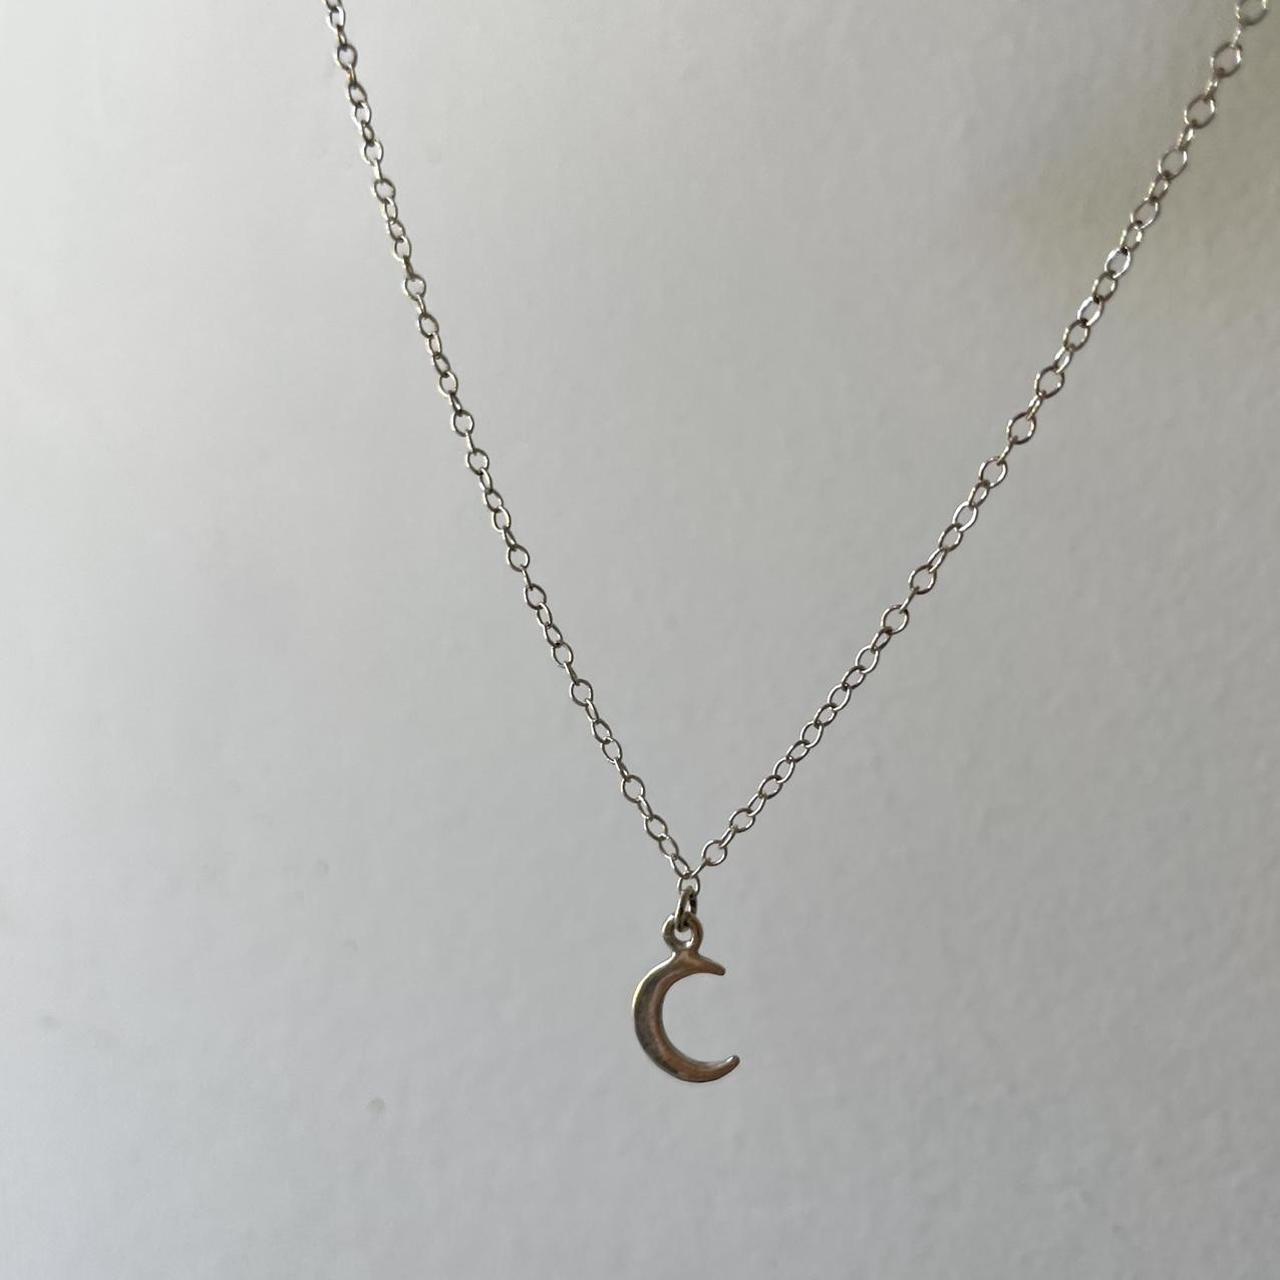 Product Image 4 - Handmade Sterling Silver Tiny Crescent